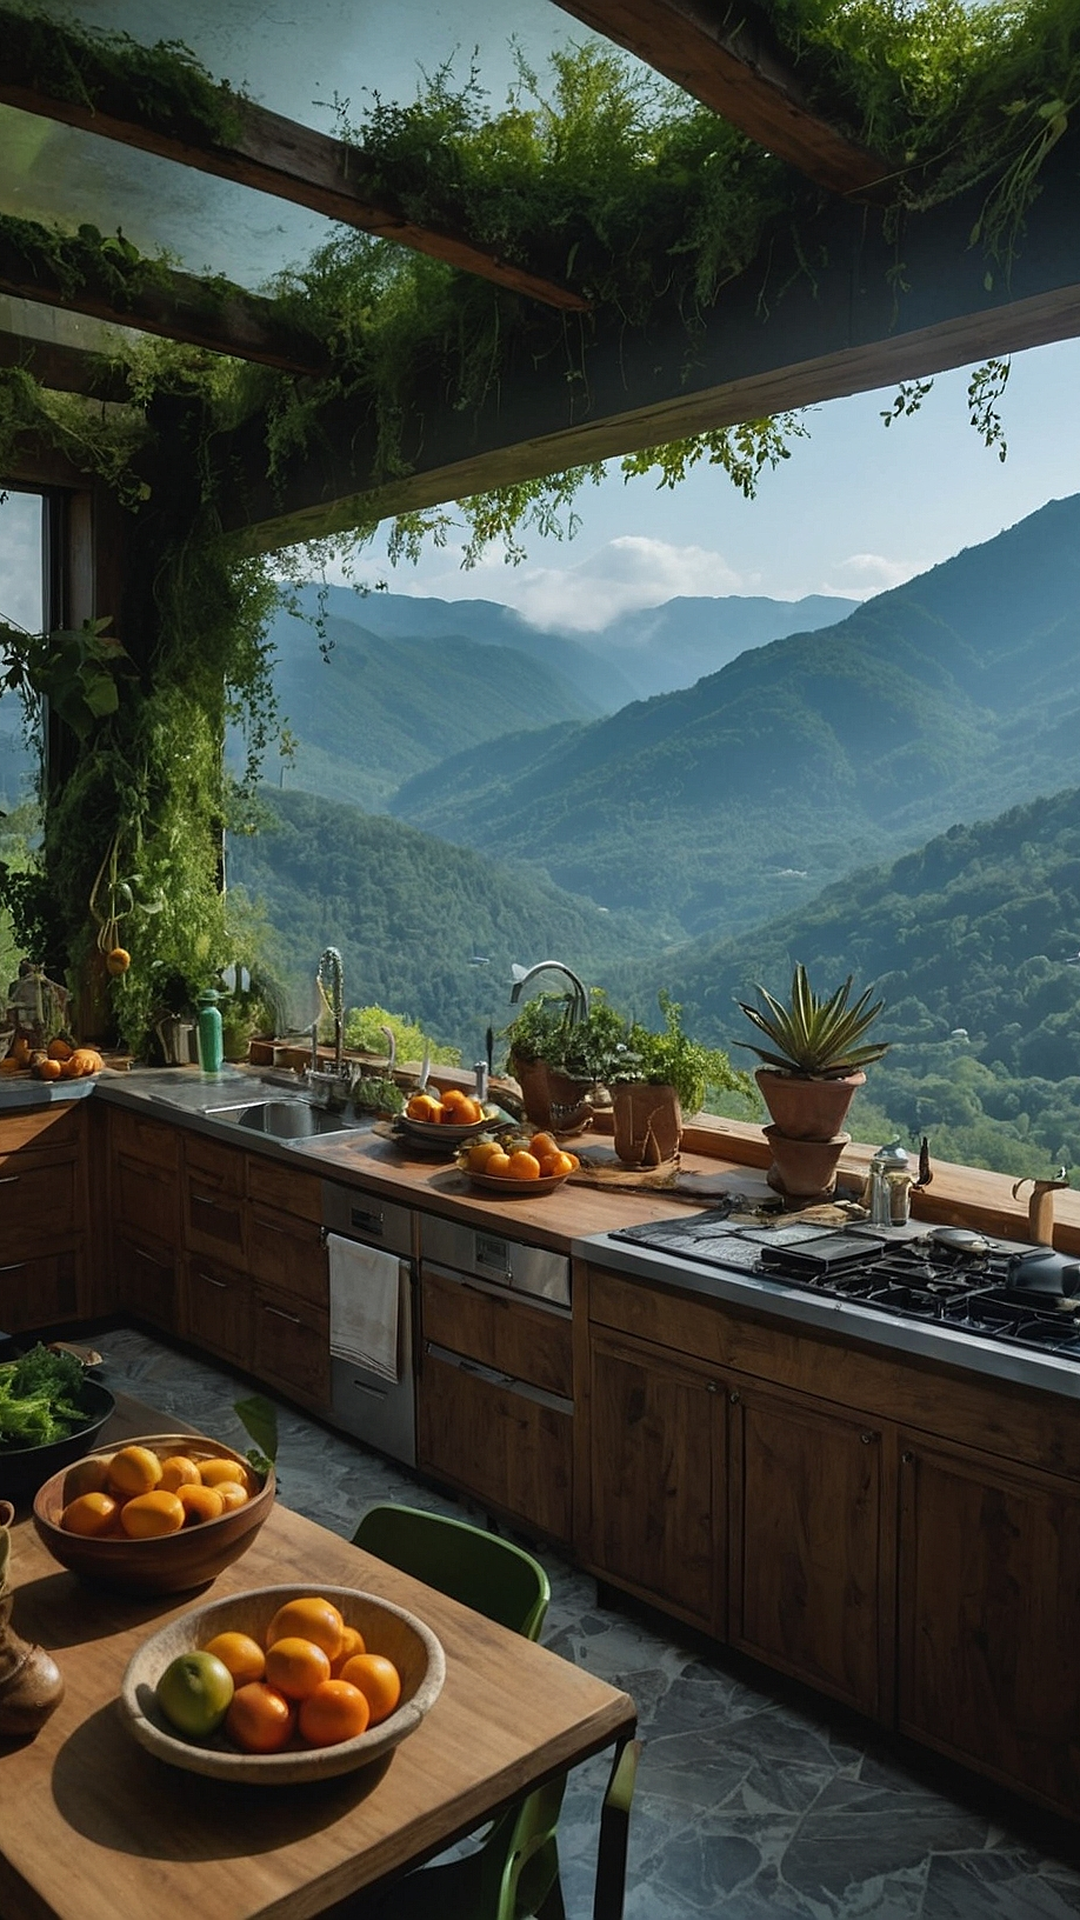 Calming Green Serenade for Your Kitchen